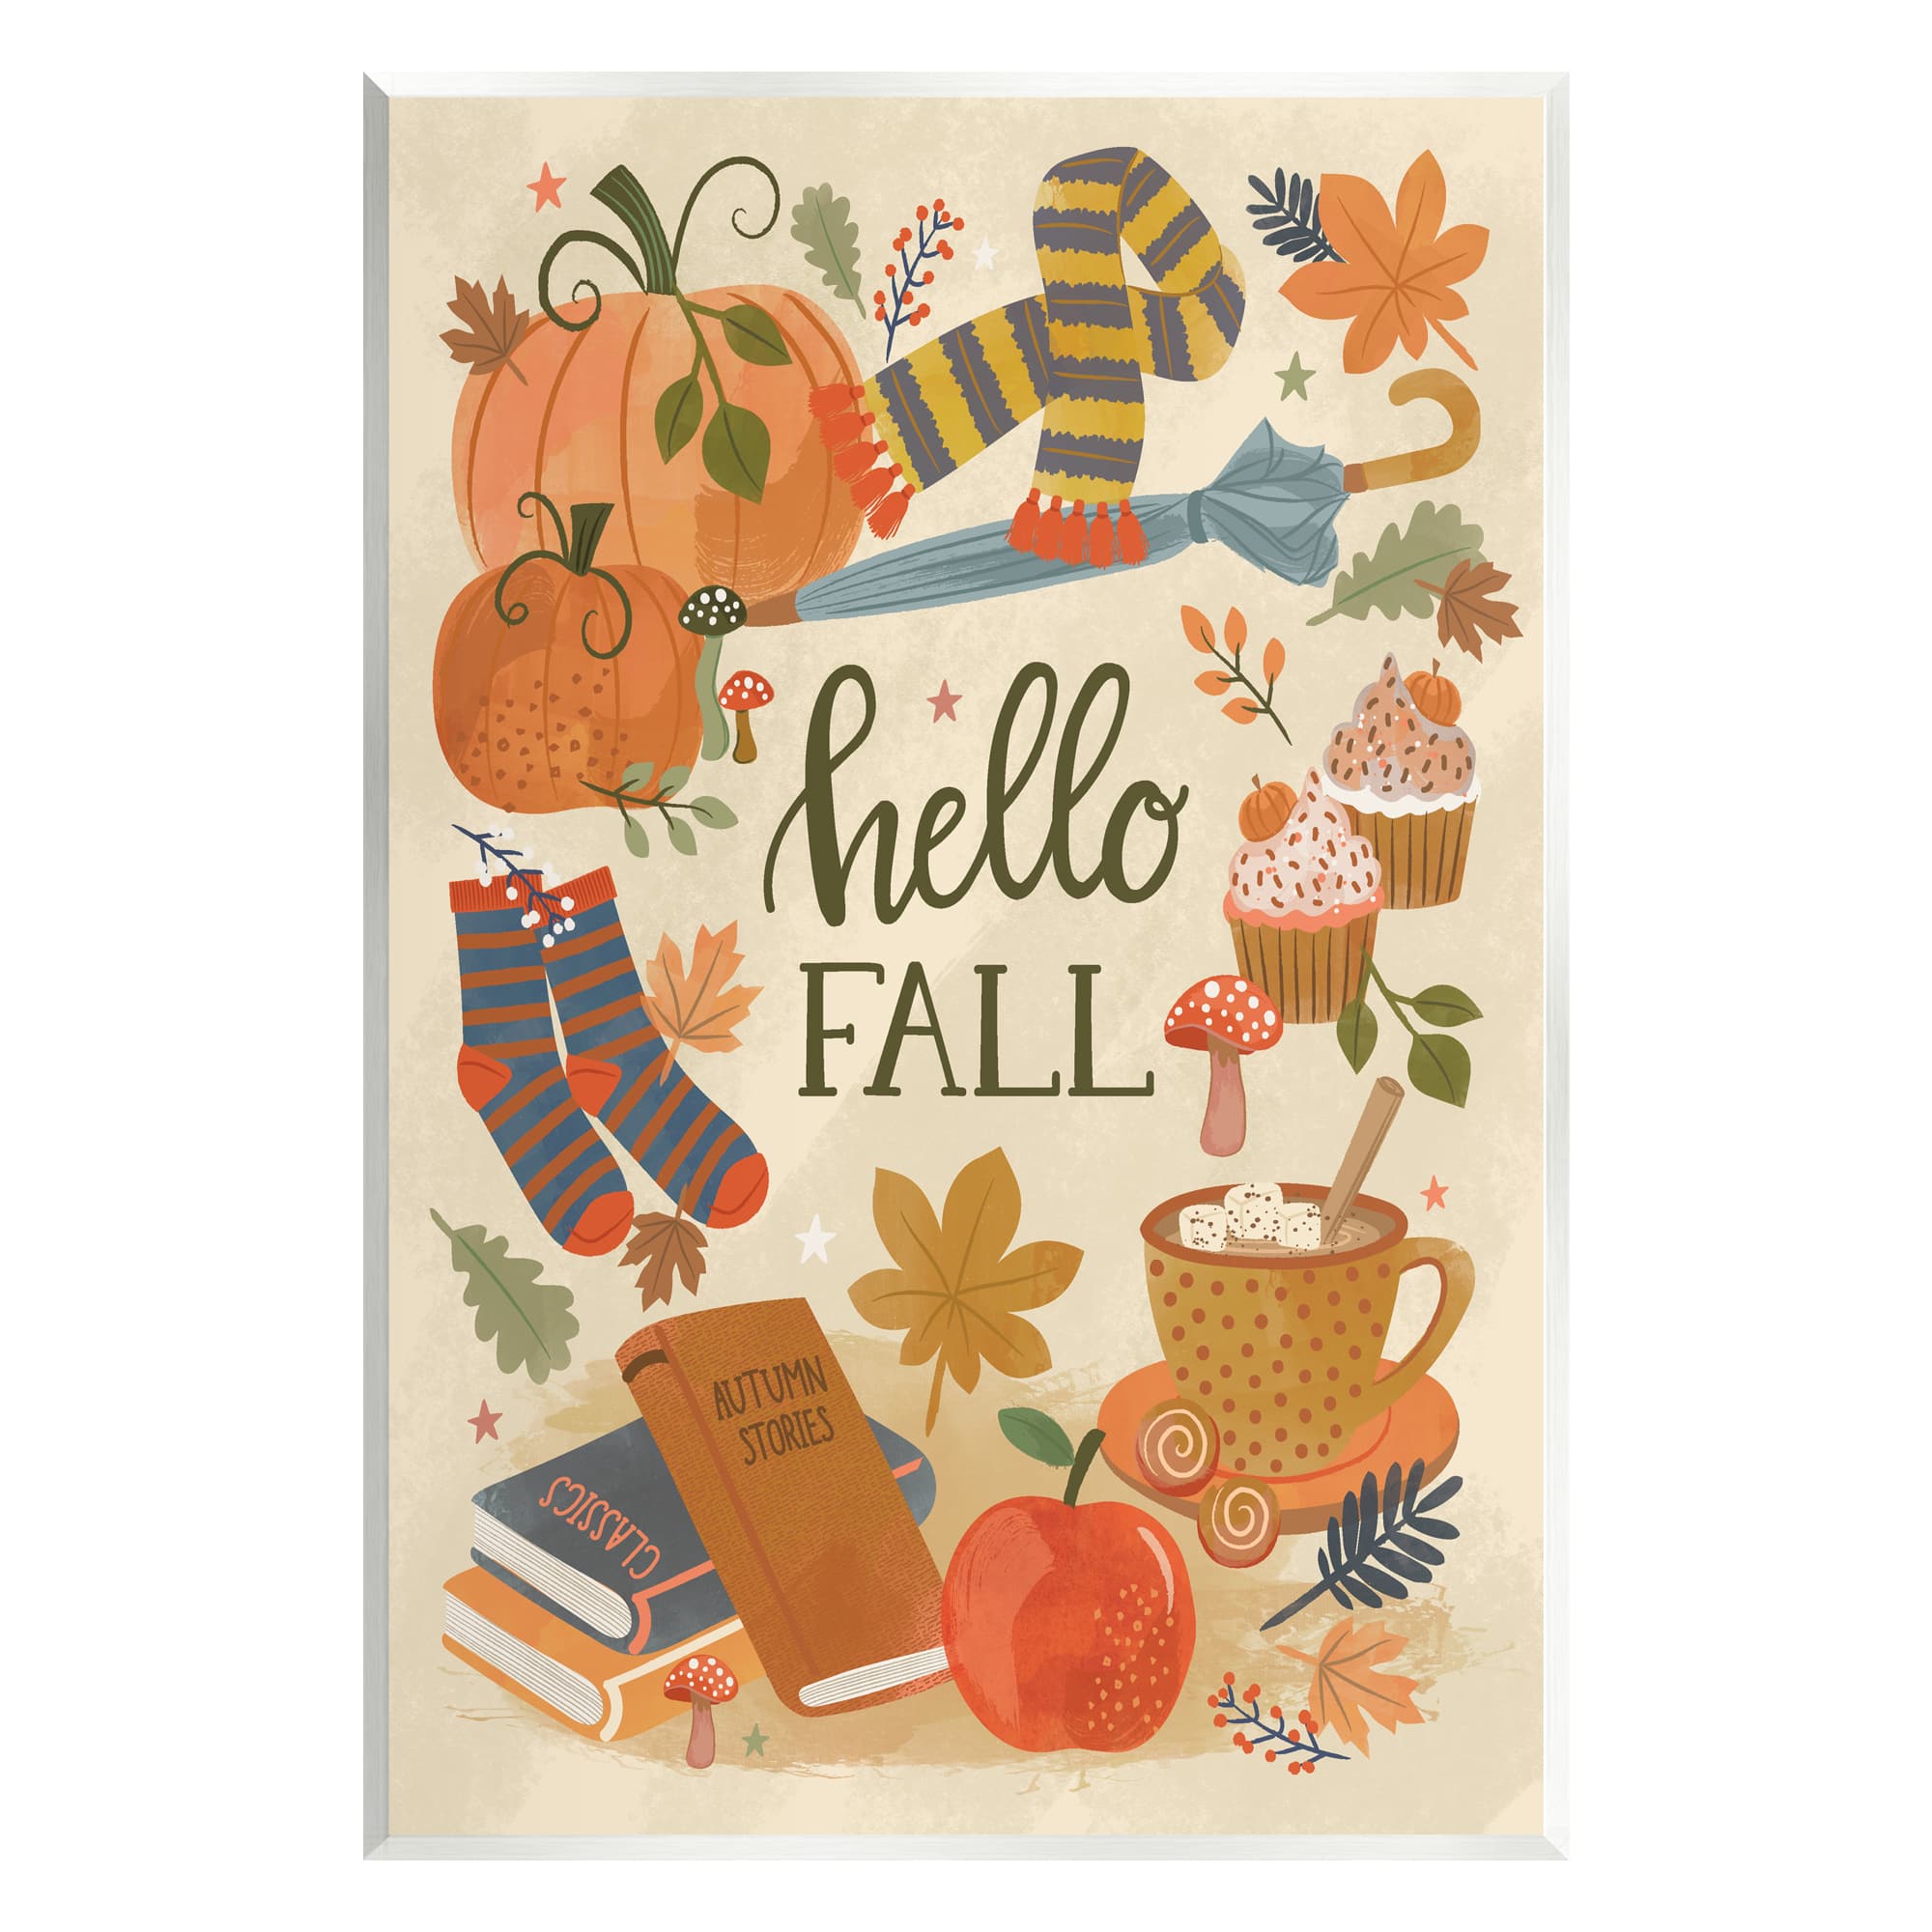 Stupell Industries Hello Fall Cozy Autumn Items Wall Plaque Art